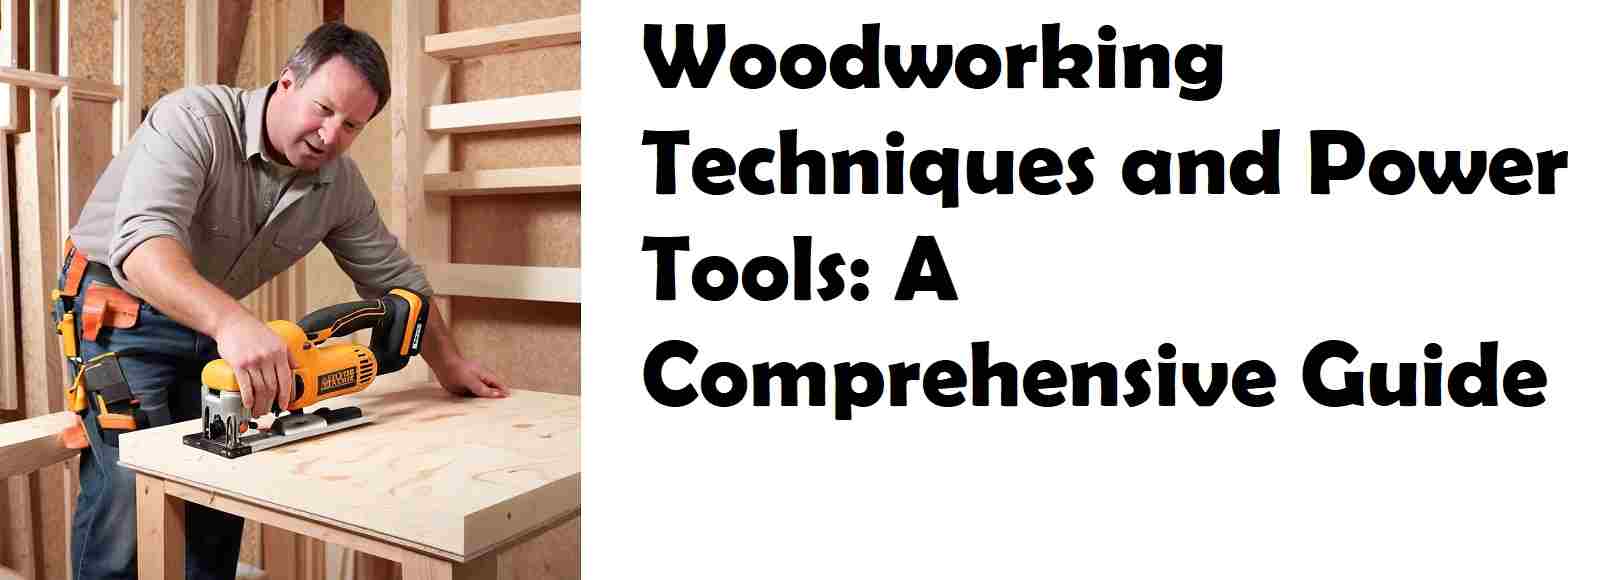 Woodworking Techniques and Power Tools